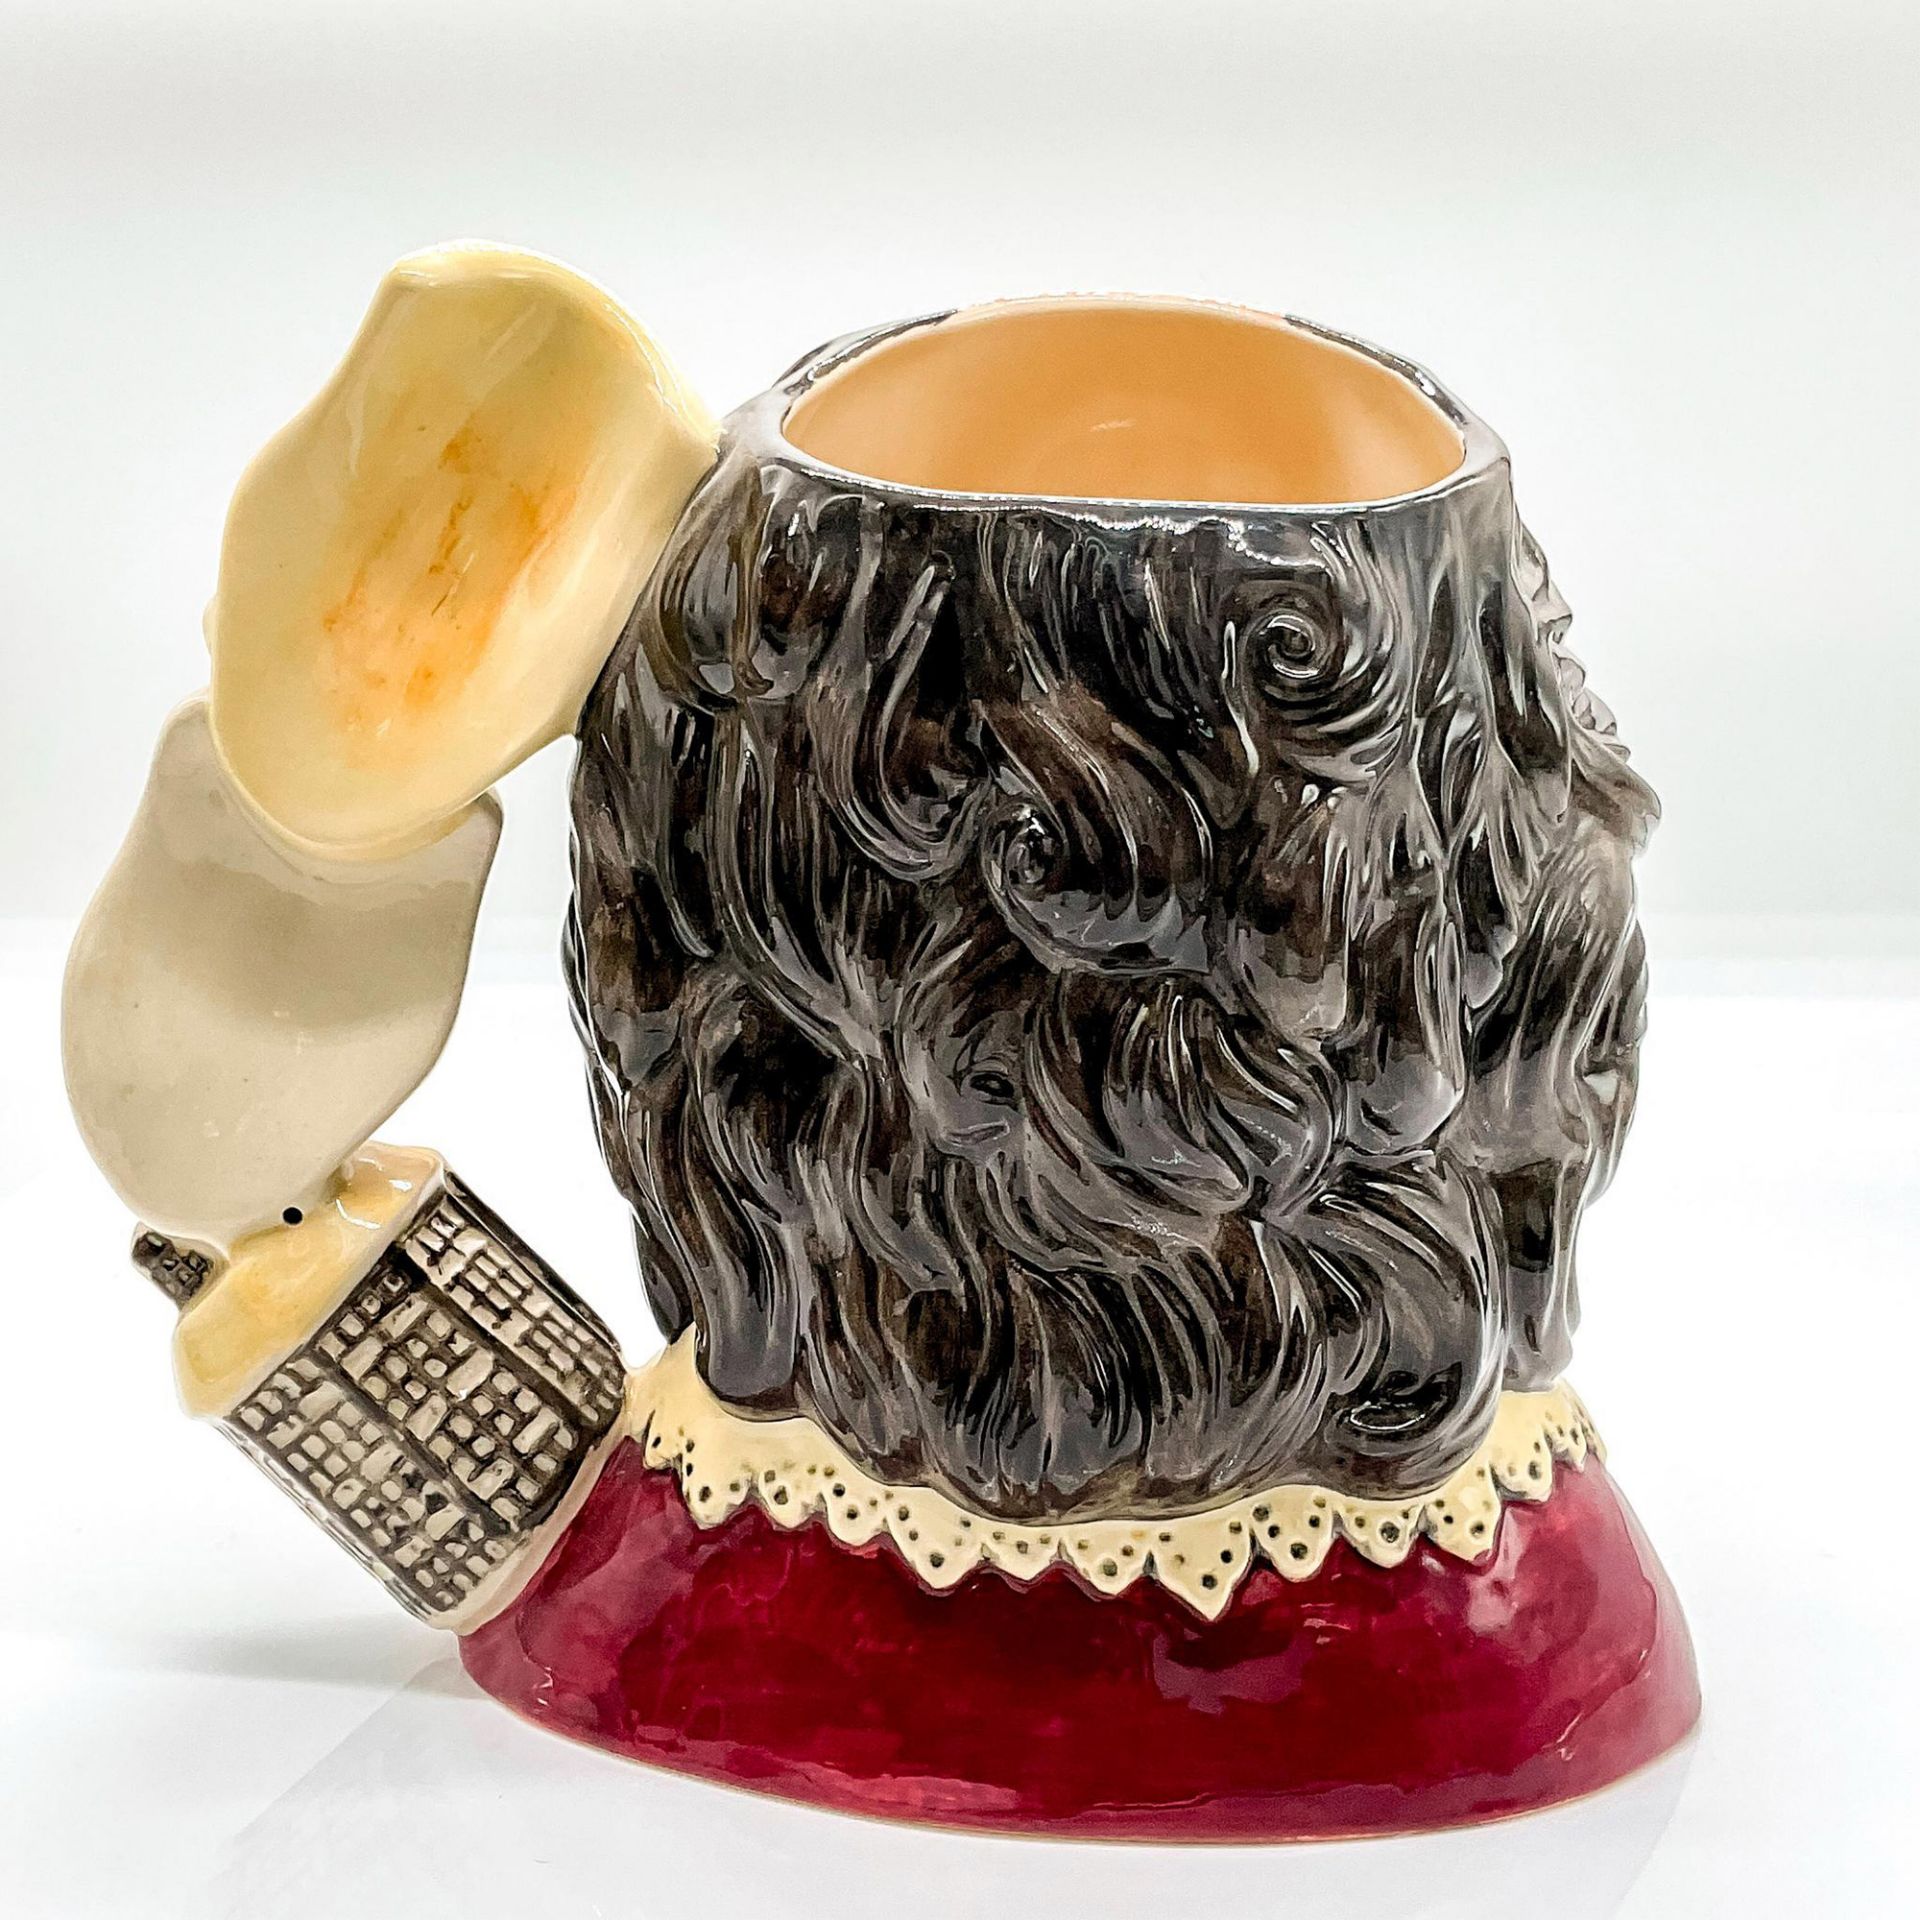 Shakespeare D7136 (with Globe Masks - 1999 Jug of the Year) - Large - Royal Doulton Character Jug - Image 2 of 3